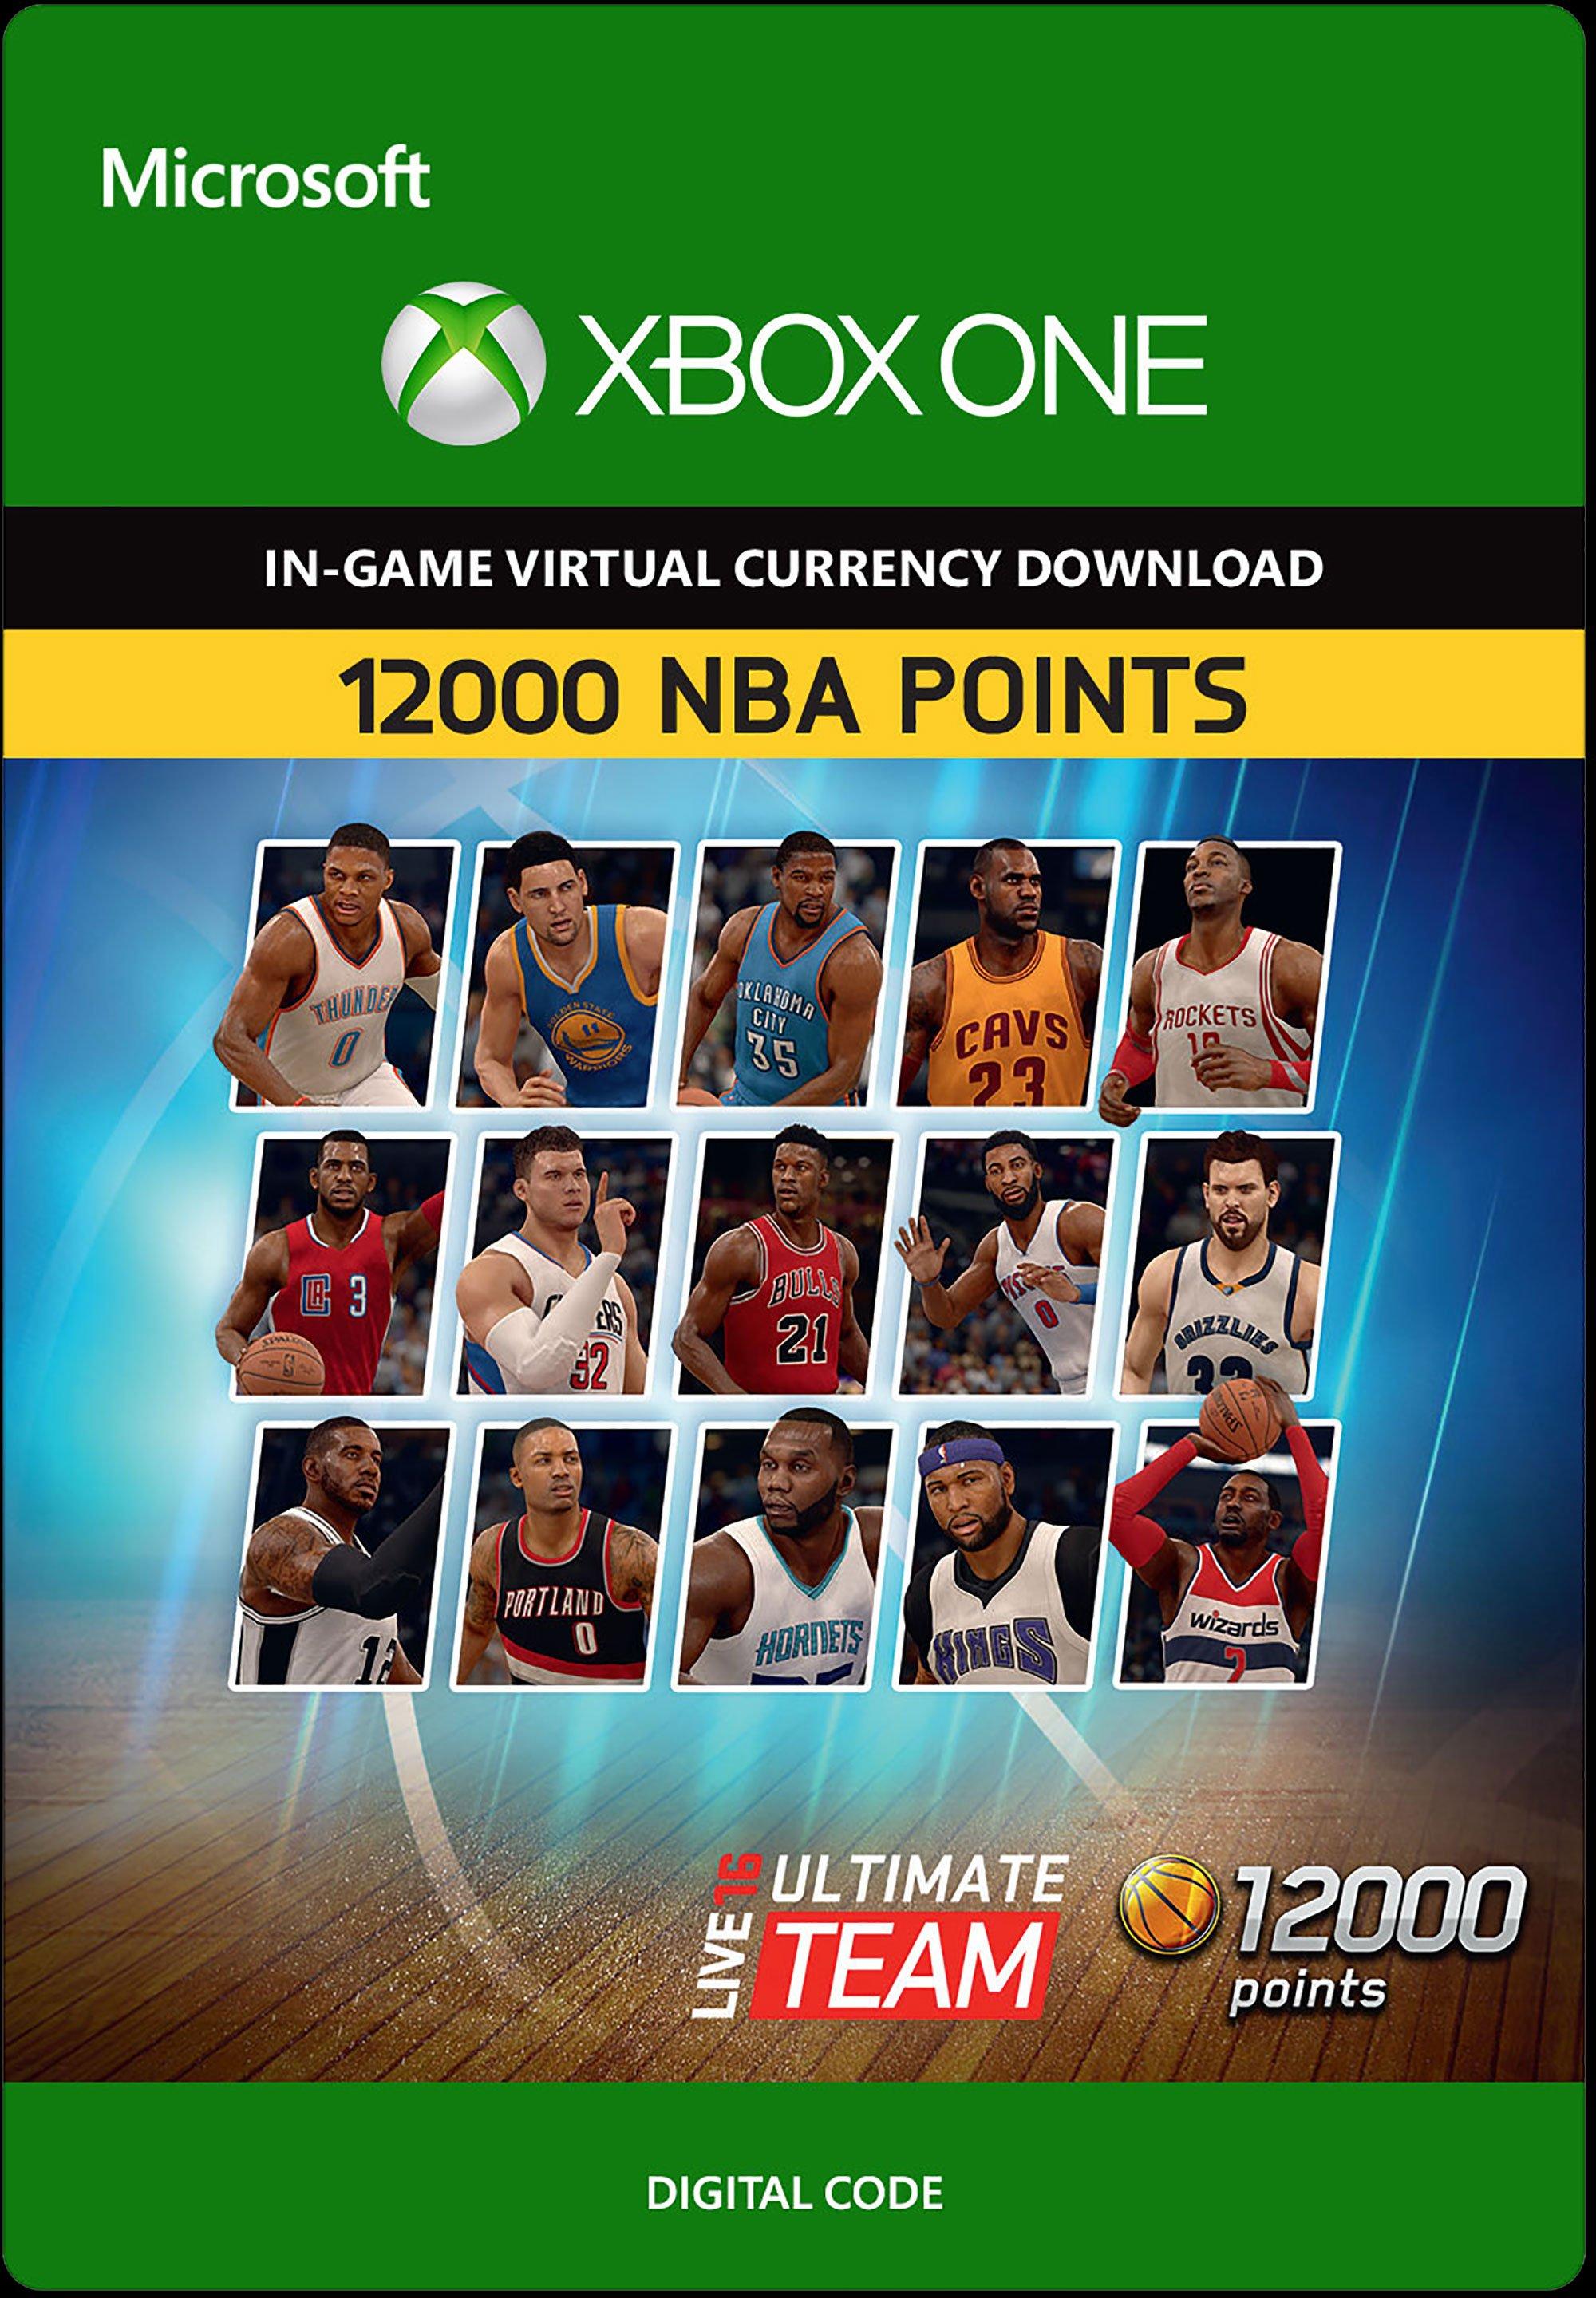 NBA Live 16 Ultimate Team NBA Points 12,000 - Xbox One